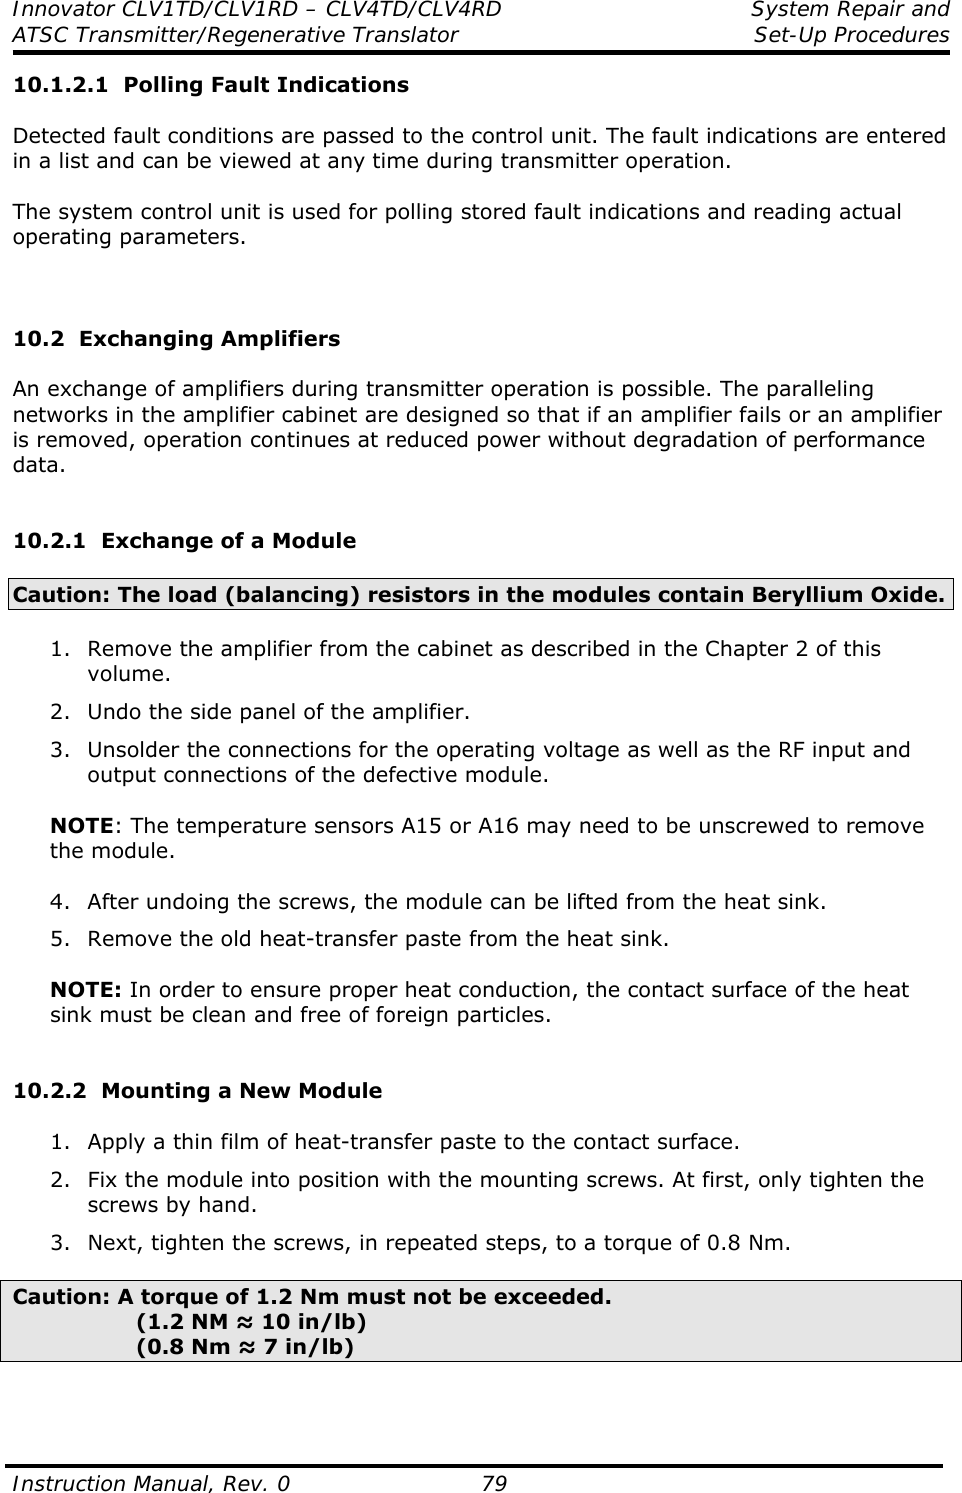 Innovator CLV1TD/CLV1RD – CLV4TD/CLV4RD  System Repair and  ATSC Transmitter/Regenerative Translator Set-Up Procedures  Instruction Manual, Rev. 0    79 10.1.2.1  Polling Fault Indications  Detected fault conditions are passed to the control unit. The fault indications are entered in a list and can be viewed at any time during transmitter operation.  The system control unit is used for polling stored fault indications and reading actual operating parameters.    10.2  Exchanging Amplifiers  An exchange of amplifiers during transmitter operation is possible. The paralleling networks in the amplifier cabinet are designed so that if an amplifier fails or an amplifier is removed, operation continues at reduced power without degradation of performance data.   10.2.1  Exchange of a Module  Caution: The load (balancing) resistors in the modules contain Beryllium Oxide.  1. Remove the amplifier from the cabinet as described in the Chapter 2 of this volume. 2. Undo the side panel of the amplifier. 3. Unsolder the connections for the operating voltage as well as the RF input and output connections of the defective module.  NOTE: The temperature sensors A15 or A16 may need to be unscrewed to remove the module.  4. After undoing the screws, the module can be lifted from the heat sink. 5. Remove the old heat-transfer paste from the heat sink.  NOTE: In order to ensure proper heat conduction, the contact surface of the heat sink must be clean and free of foreign particles.   10.2.2  Mounting a New Module  1. Apply a thin film of heat-transfer paste to the contact surface. 2. Fix the module into position with the mounting screws. At first, only tighten the screws by hand. 3. Next, tighten the screws, in repeated steps, to a torque of 0.8 Nm.  Caution: A torque of 1.2 Nm must not be exceeded.          (1.2 NM ≈ 10 in/lb)          (0.8 Nm ≈ 7 in/lb)    